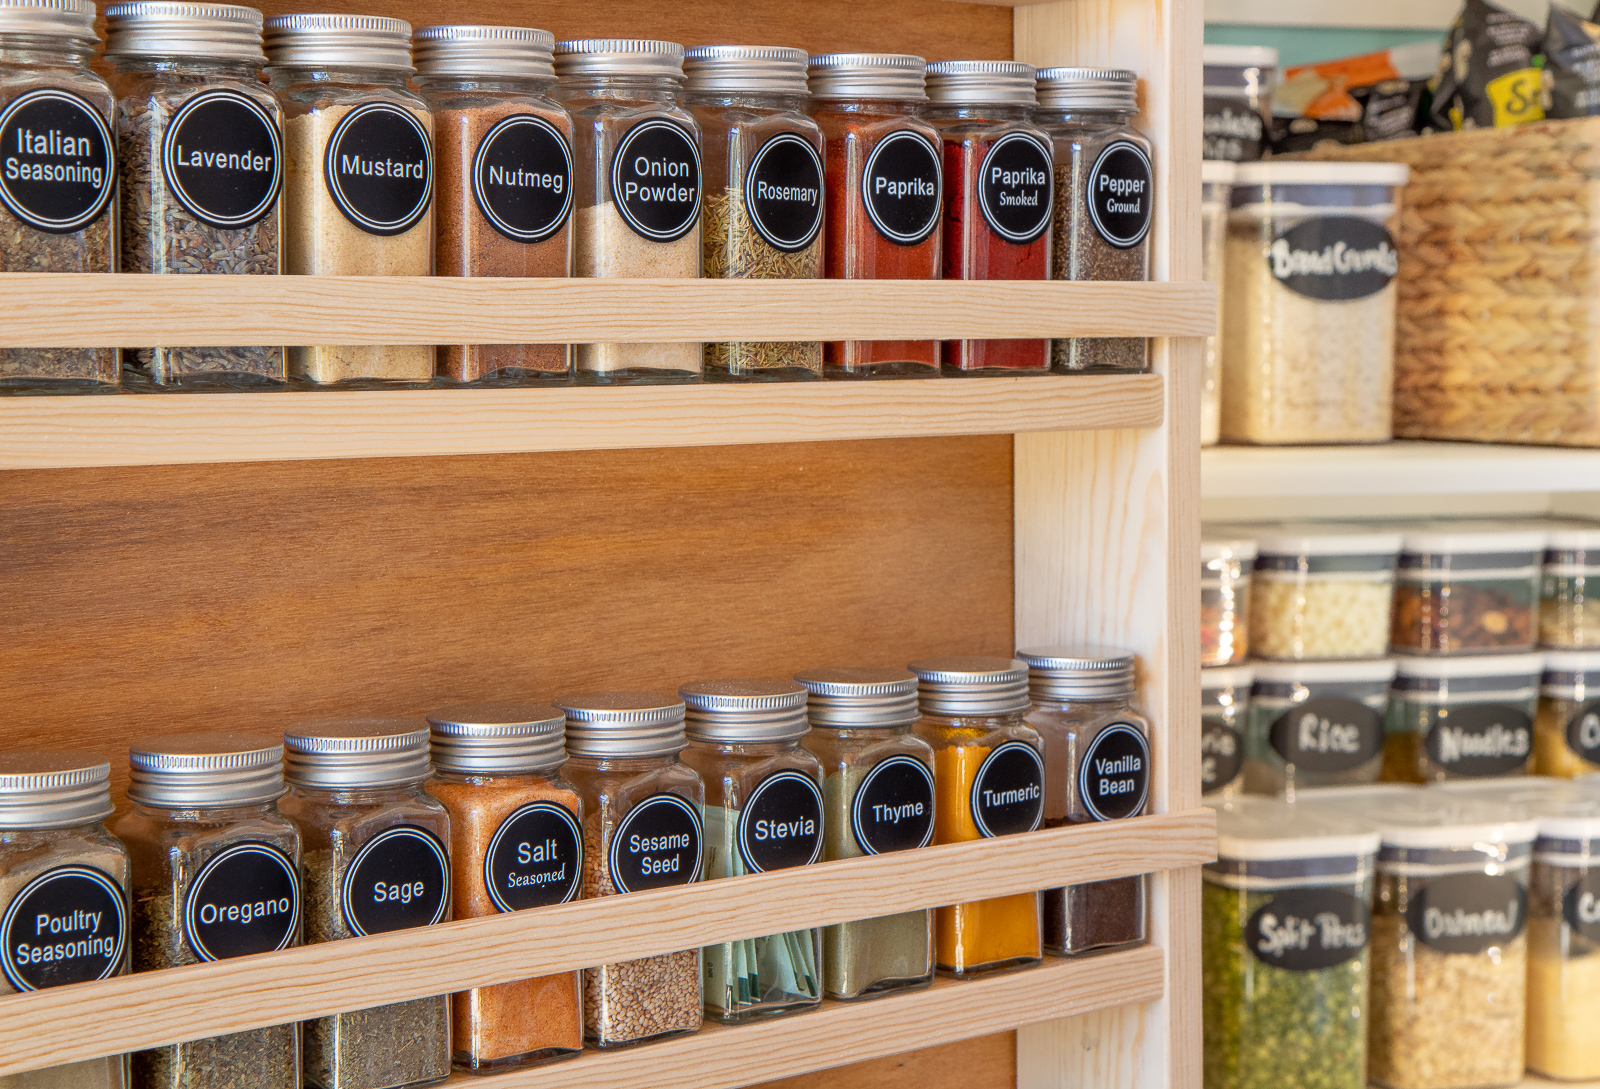 The best way to organize your spices